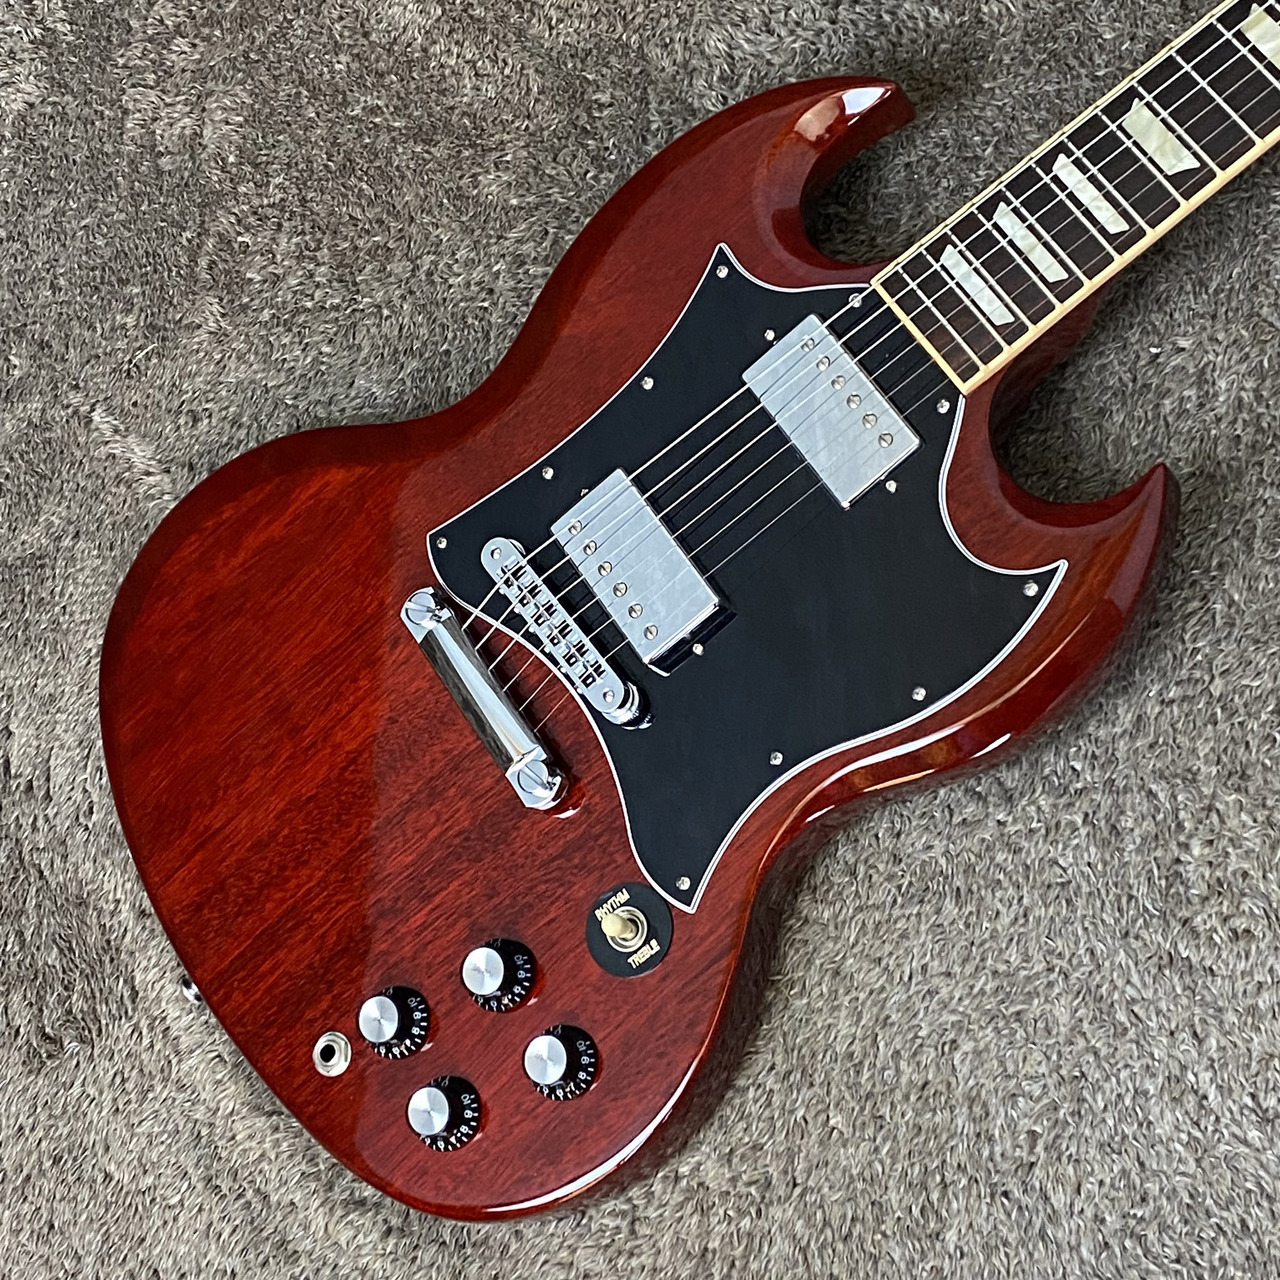 GIBSON SG SPECIAL FADED エボニー指板 ムーンインレイ - エレキギター